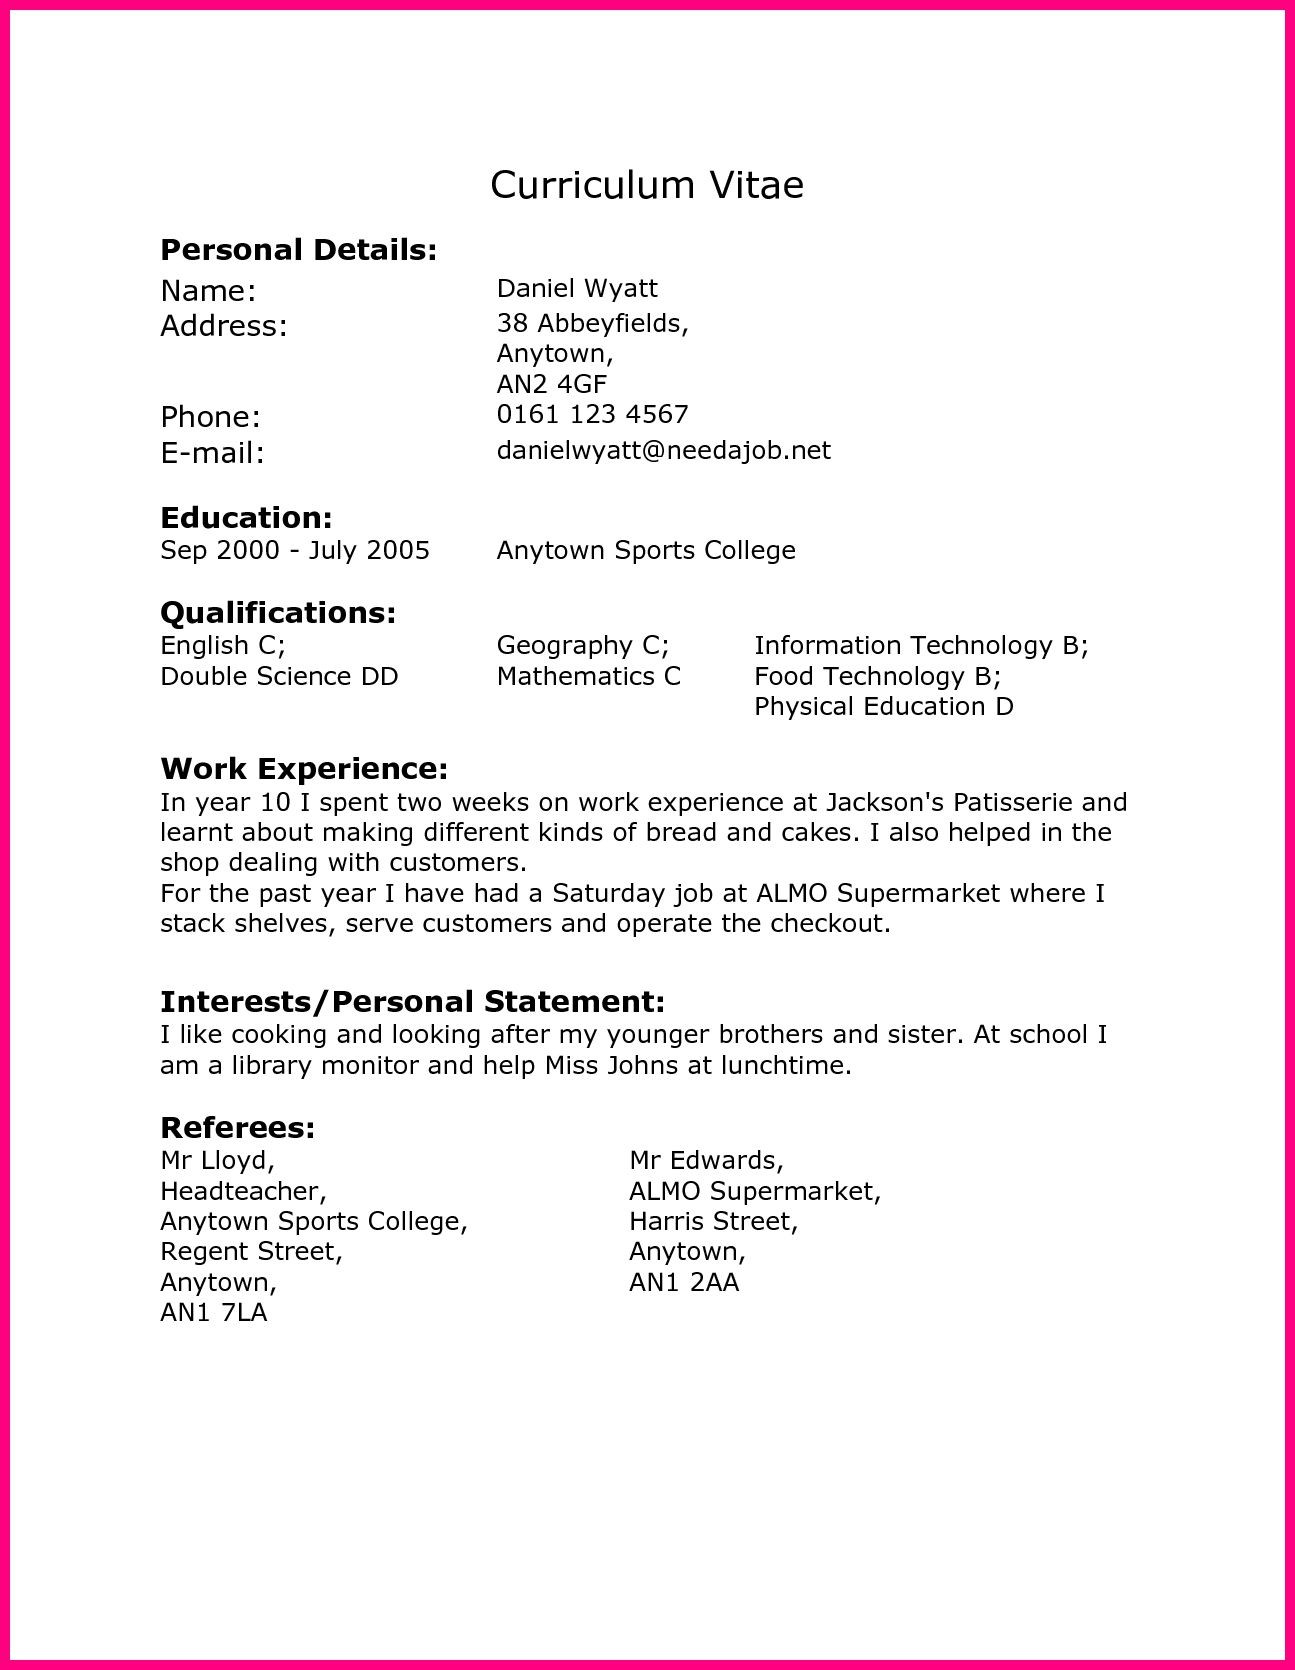 Resume Template for 10 Years Experience Cv Template Year 10 – Resume format Address Label Template …